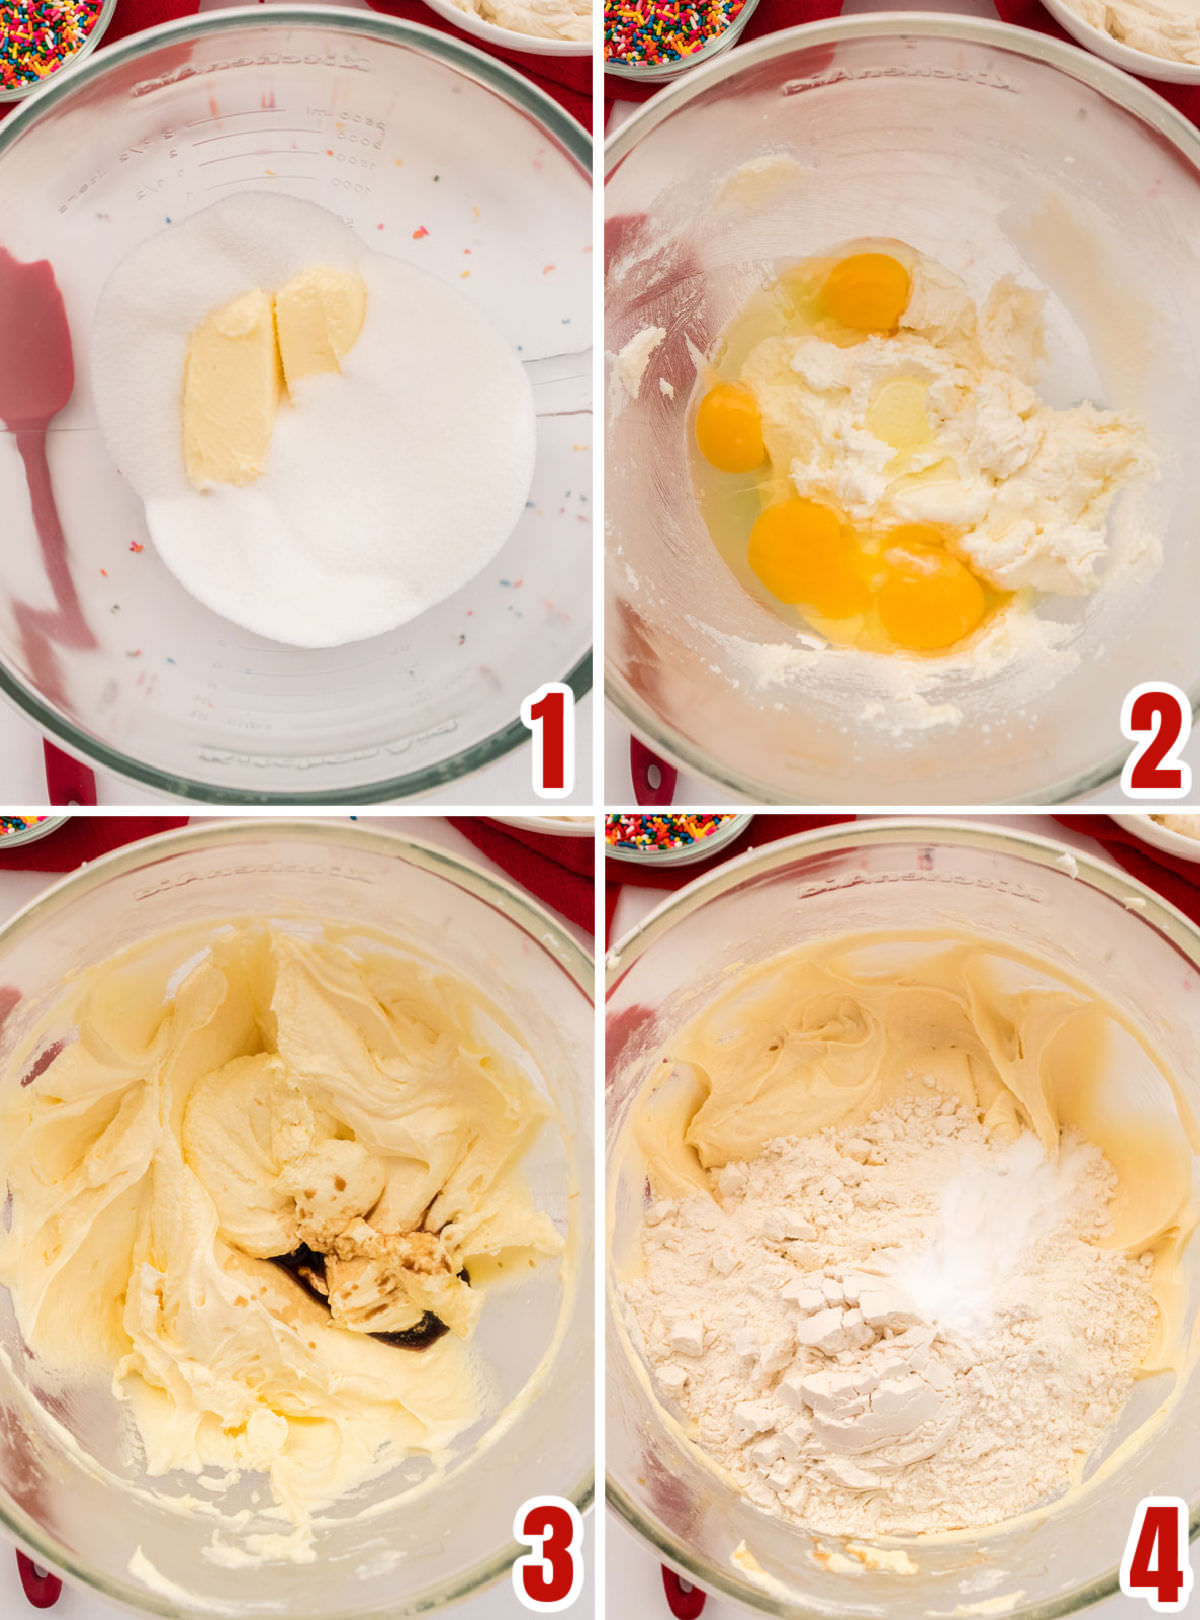 Collage image showing how to make the Sugar Cookie dough.